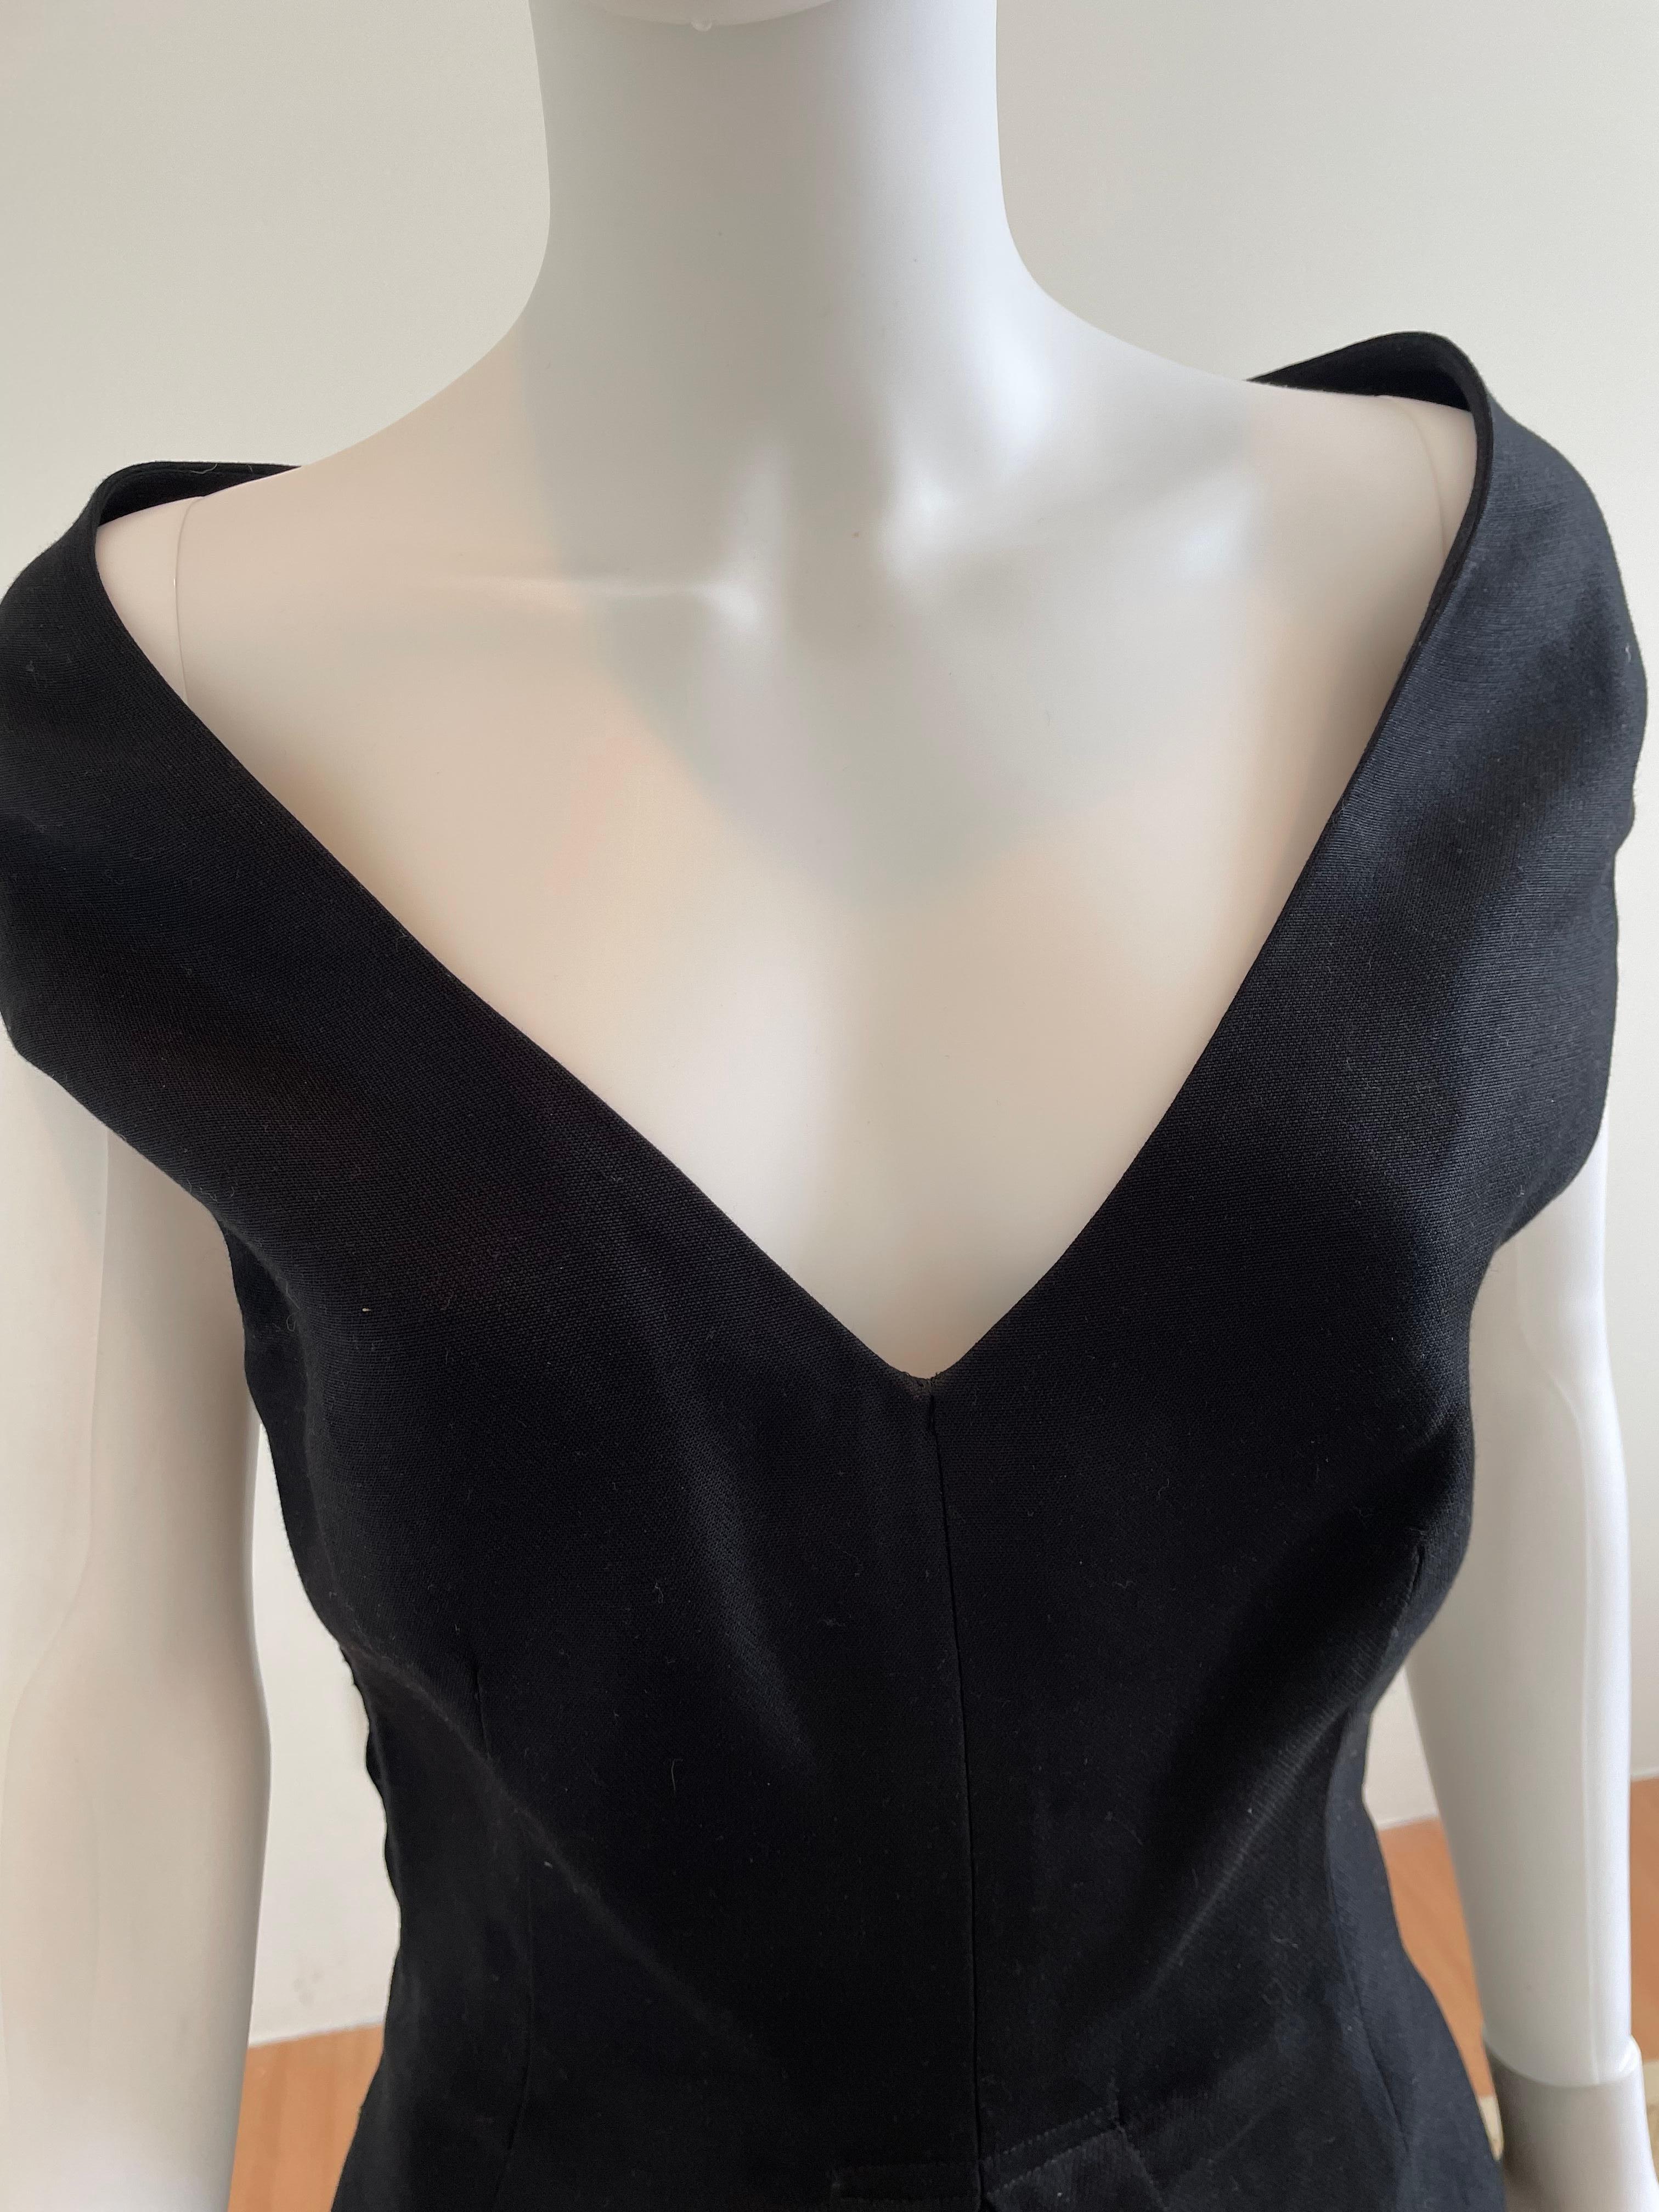 D&G v-neck mid length dress. Silk and cotton. Exposed zipper closure in the back. Made in Italy. Size 44. Please inquire if you have any questions! Please be mindful that this piece has led a previous life, and may tell its story through minor